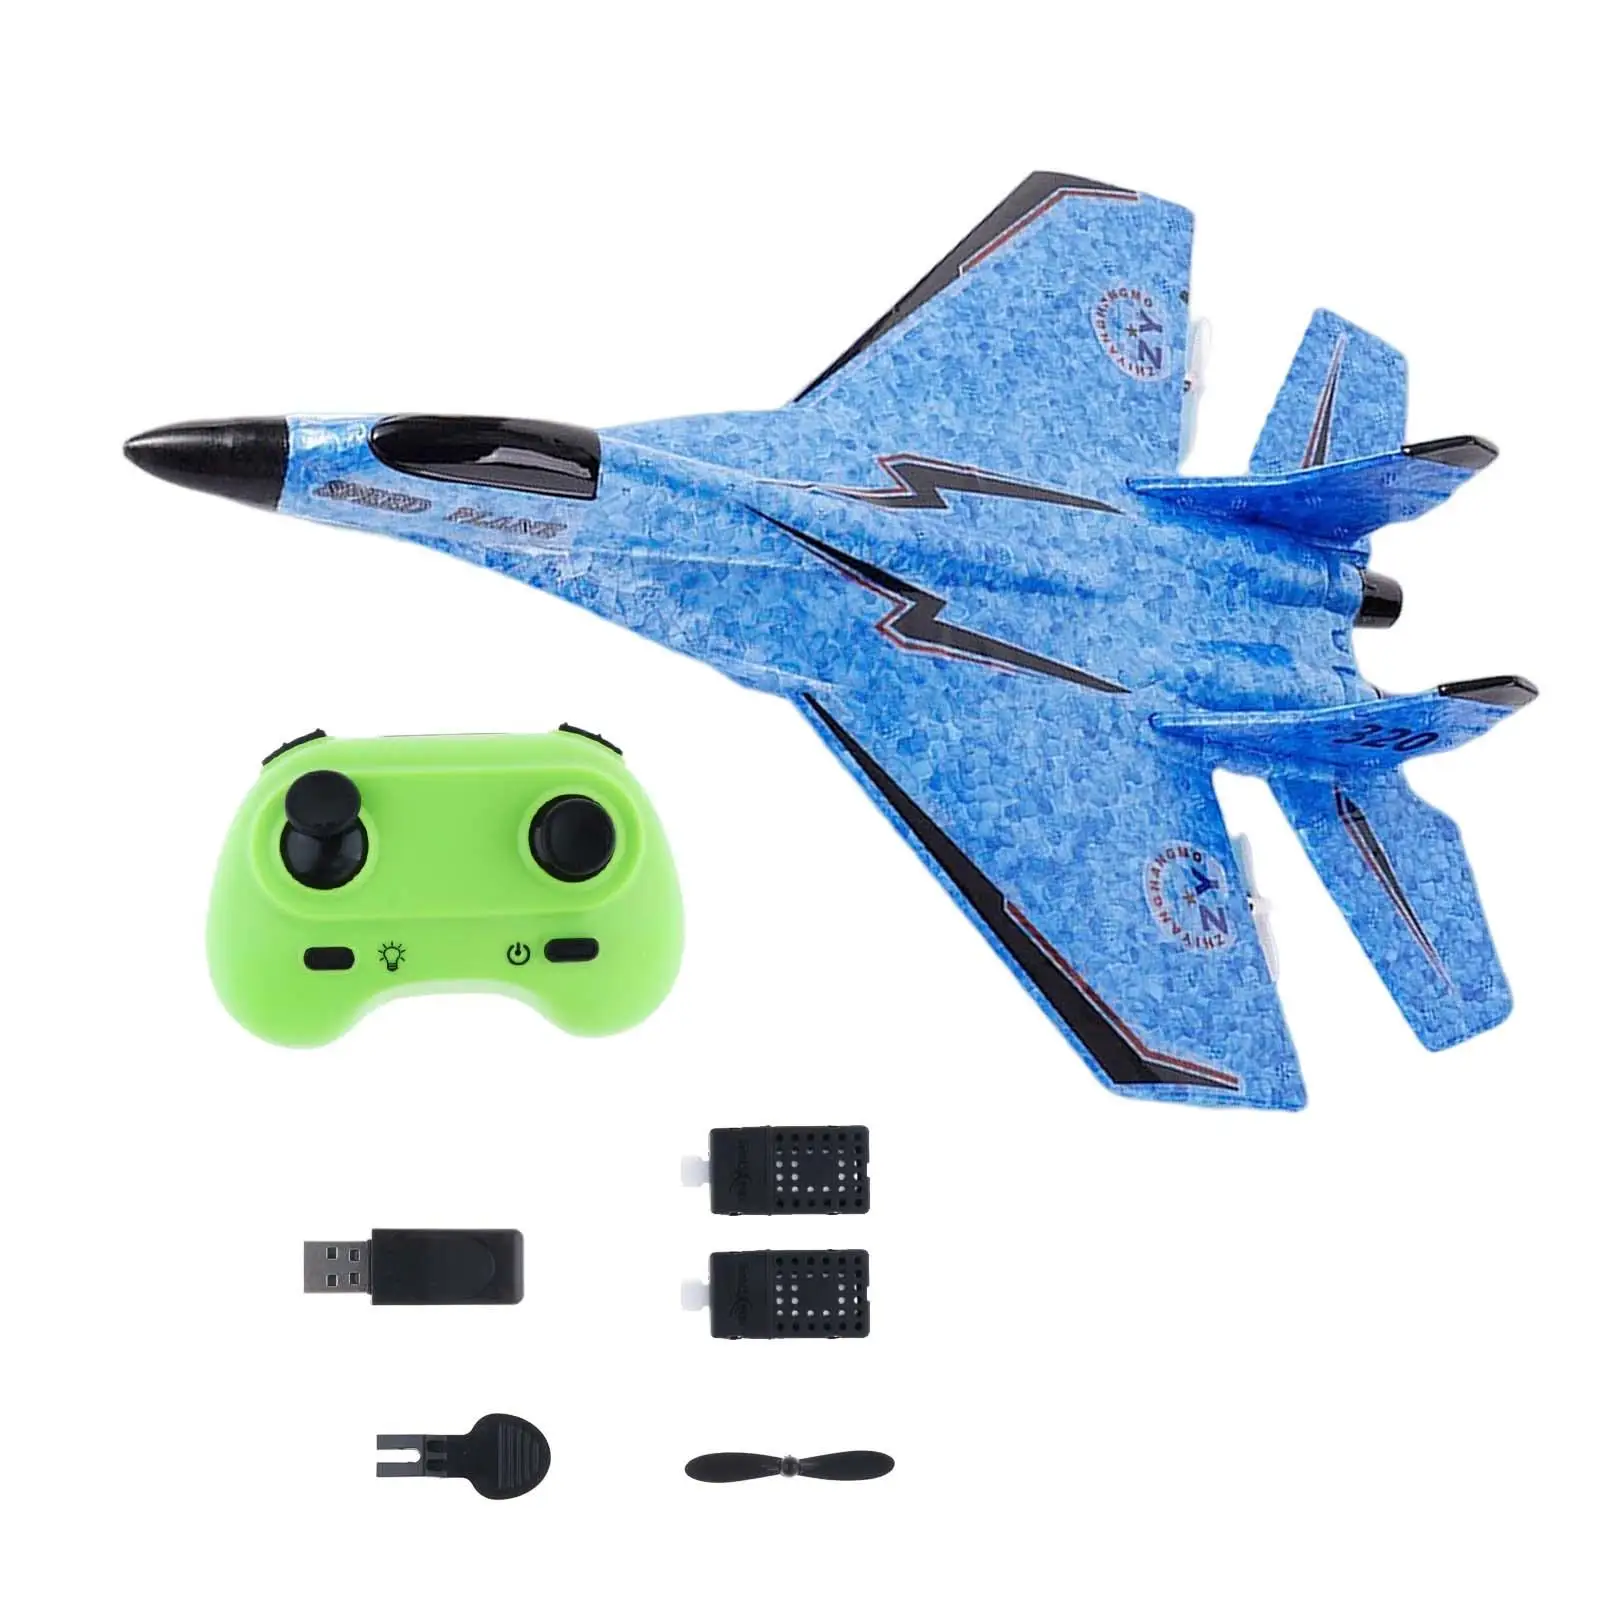 2CH RC Plane with LED Cool Light Ready to Fly Portable Outdoor Toys 2.4G Hobby RC Glider for Boys Girls Adults Beginner Kids